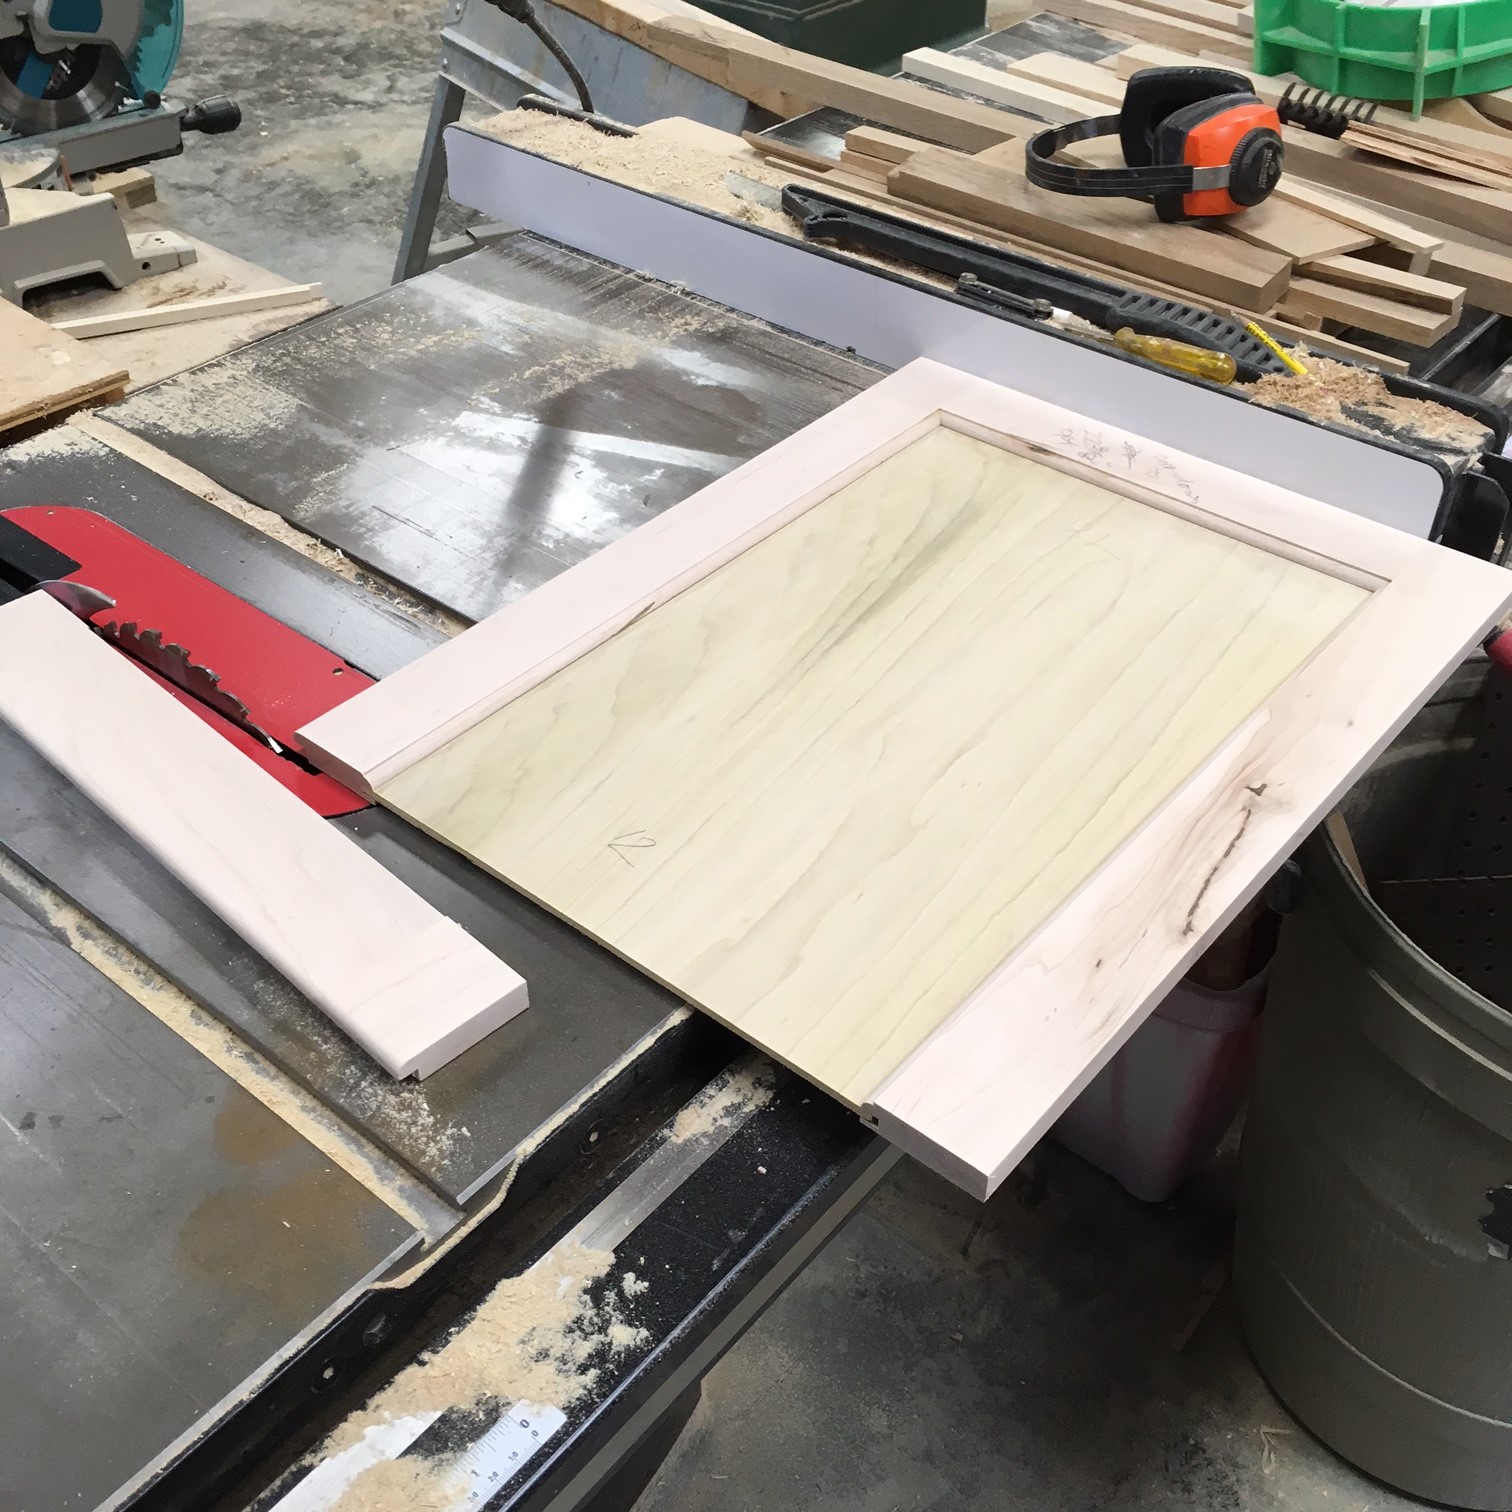 Cut the door to size on the table saw